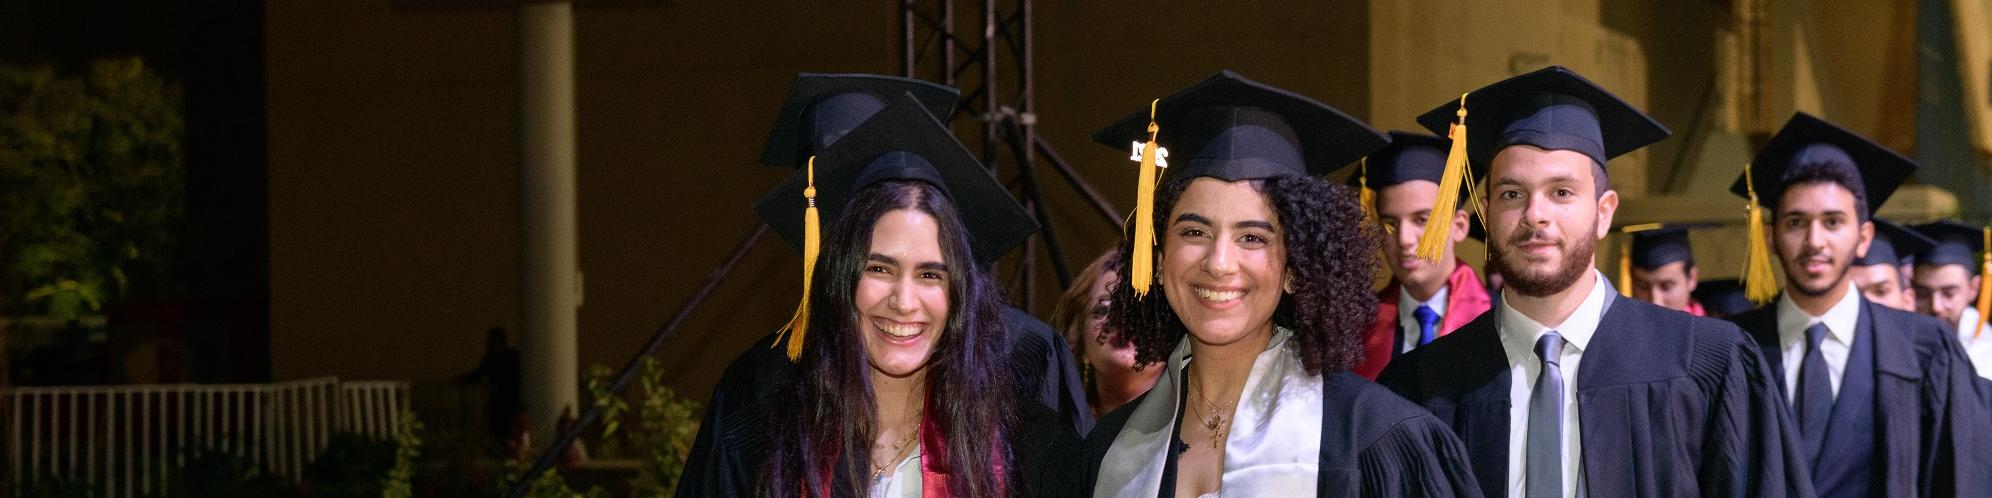 Smiling Students with cap and gown 